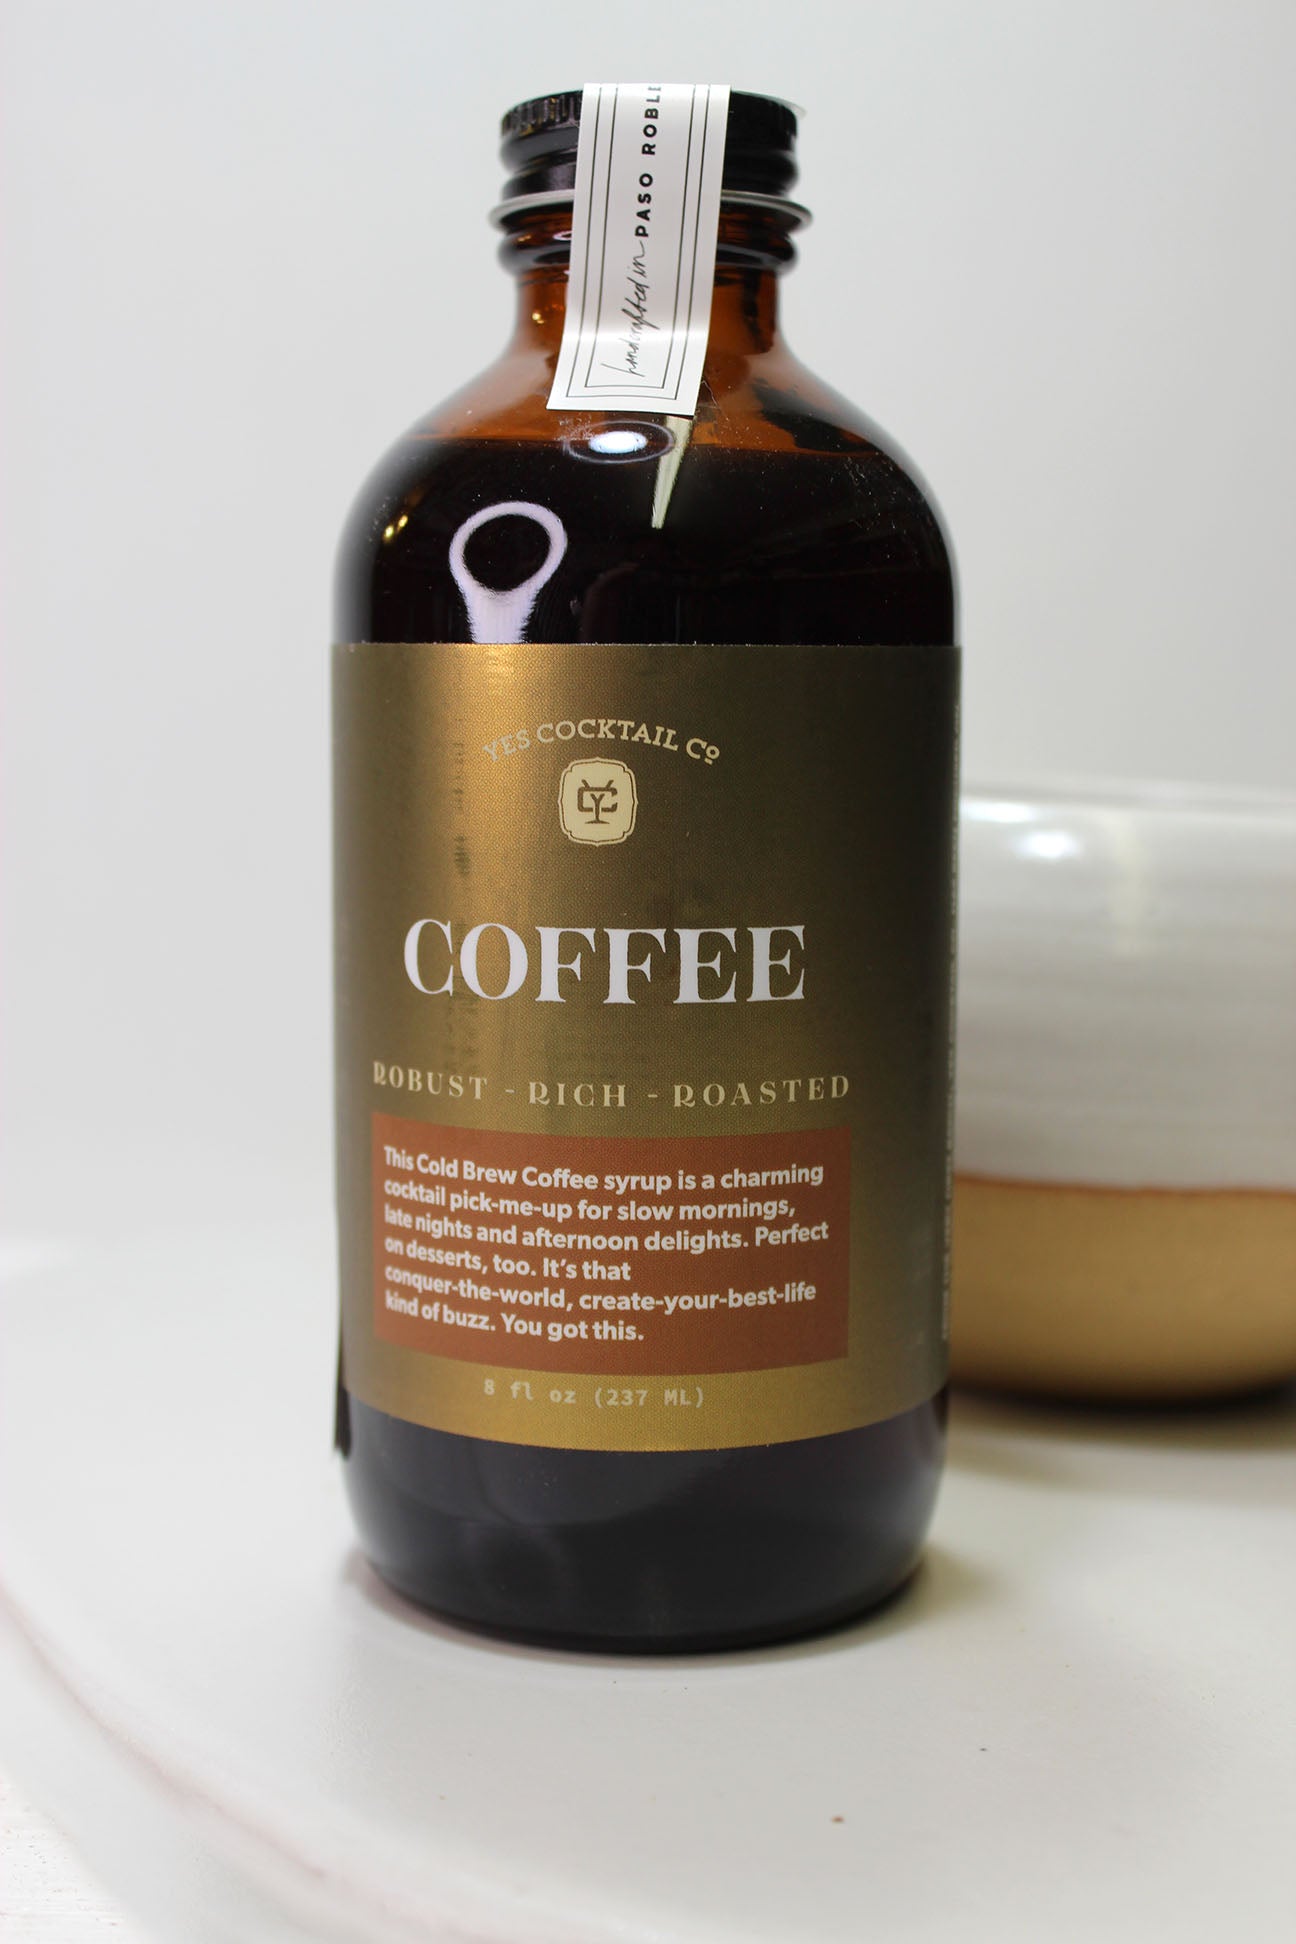 Cold Brew Coffee Syrup by Yes Cocktail Co